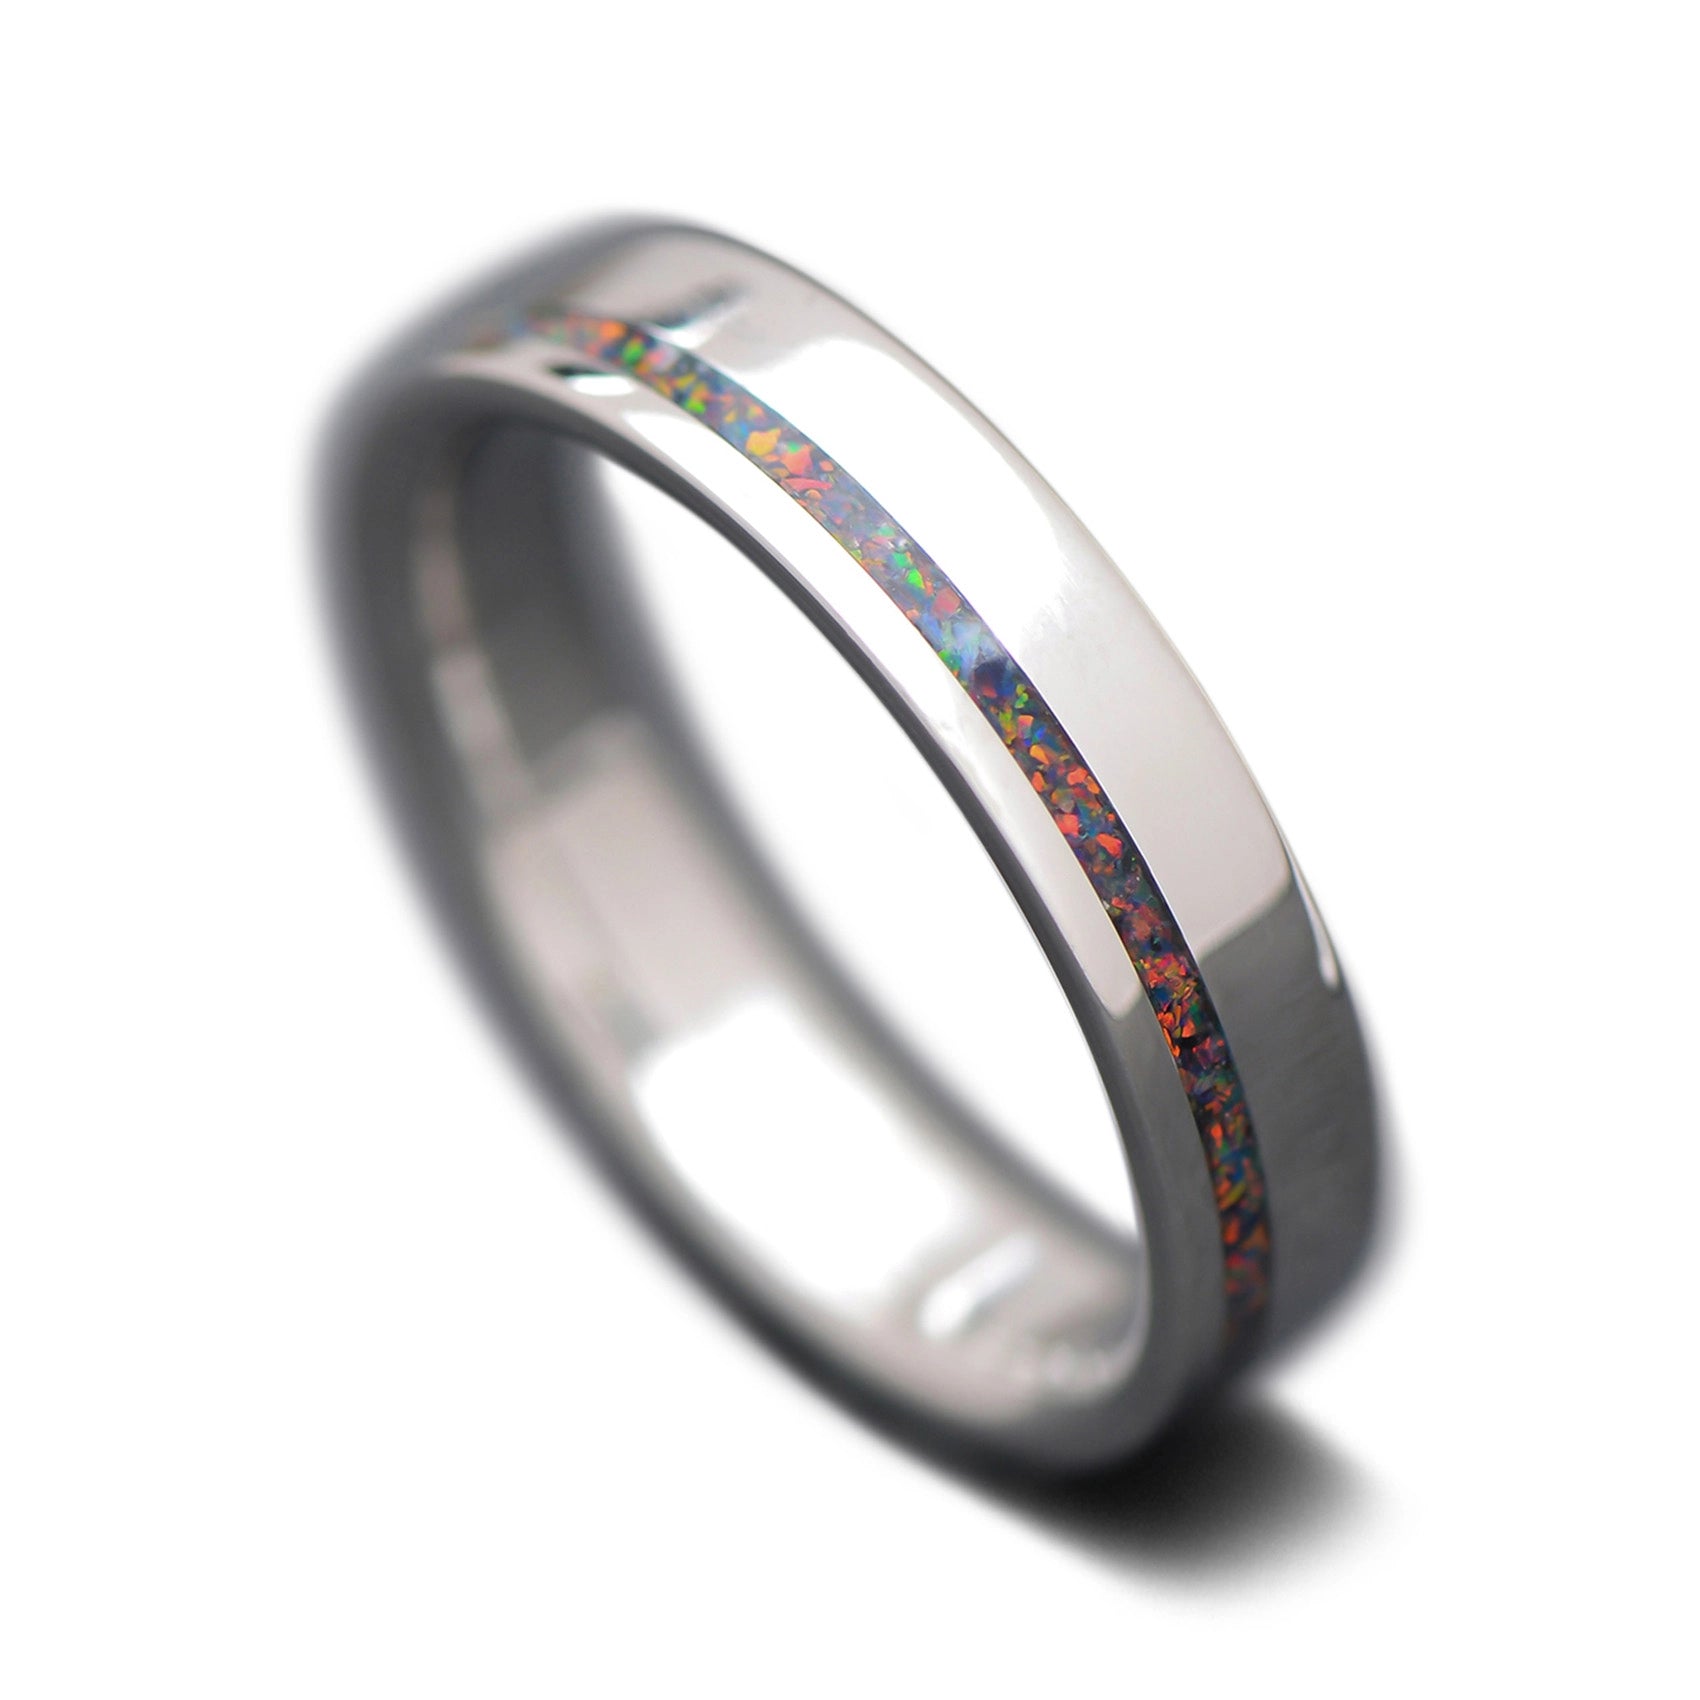  Titanium Core Ring with Black Fire Opal inlay, 5mm -THE SHIFT